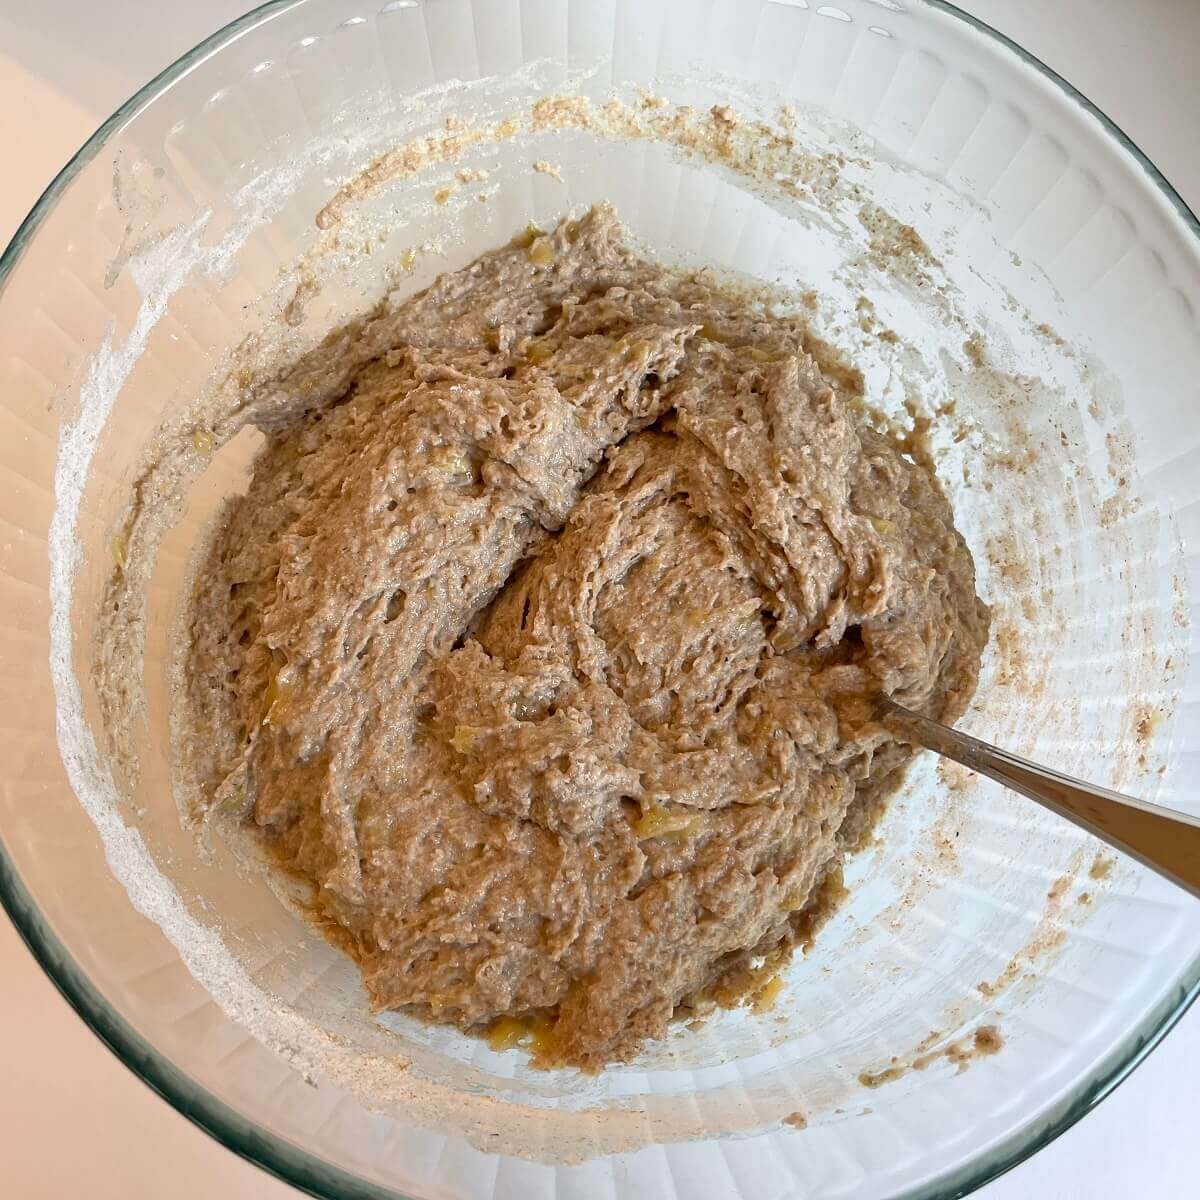 Banana muffin batter in a large glass bowl.